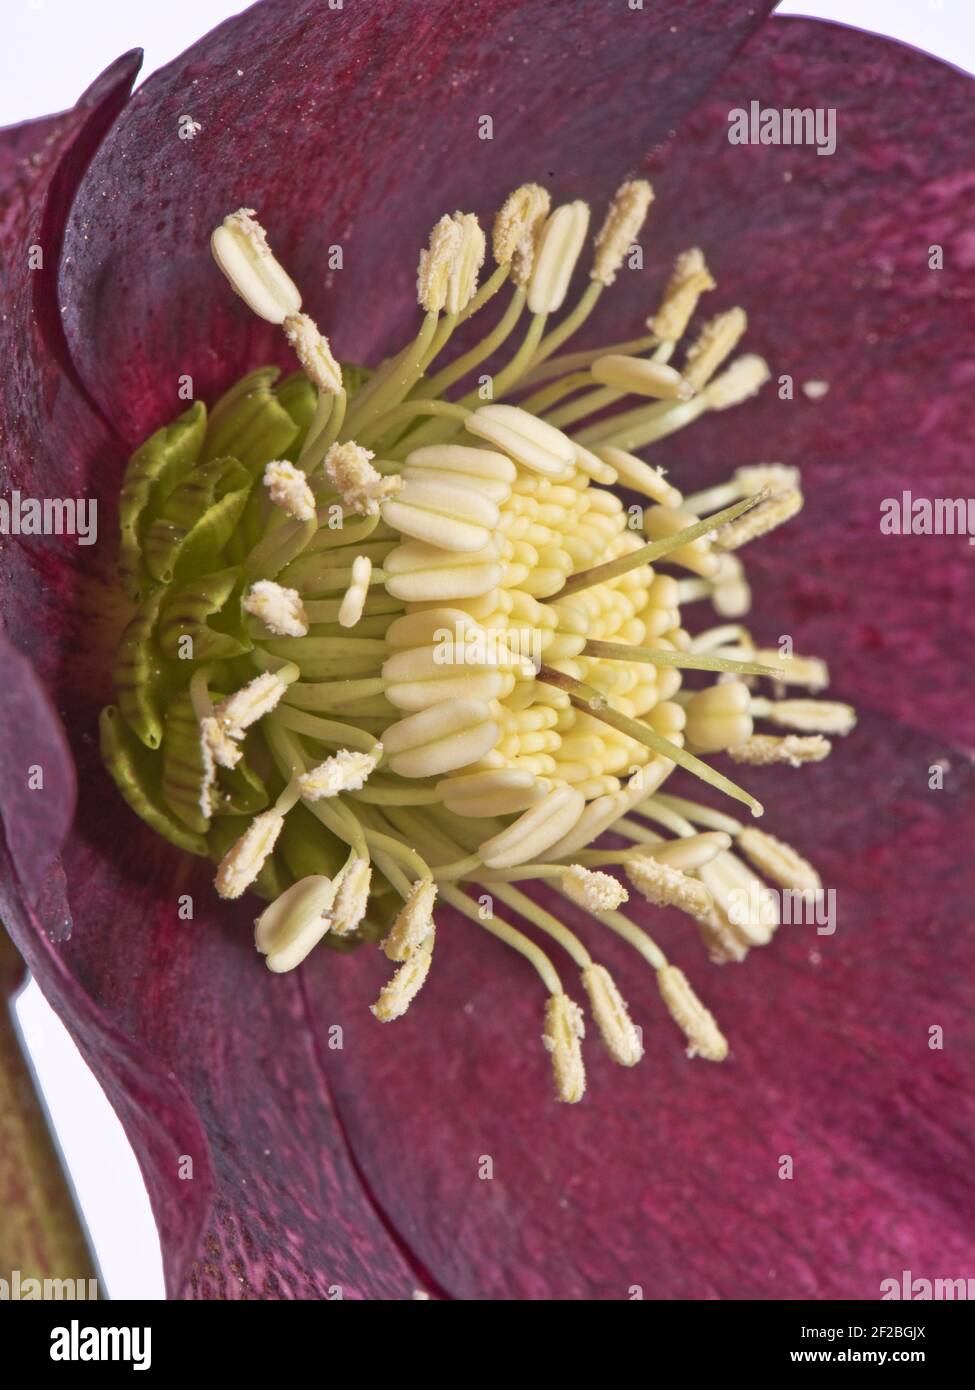 Lenten rose (Helleborus x hybridus) red flower of an ornamental garden perennial herbaceous plant showing typical structure of flowering Ranunculaceae Stock Photo